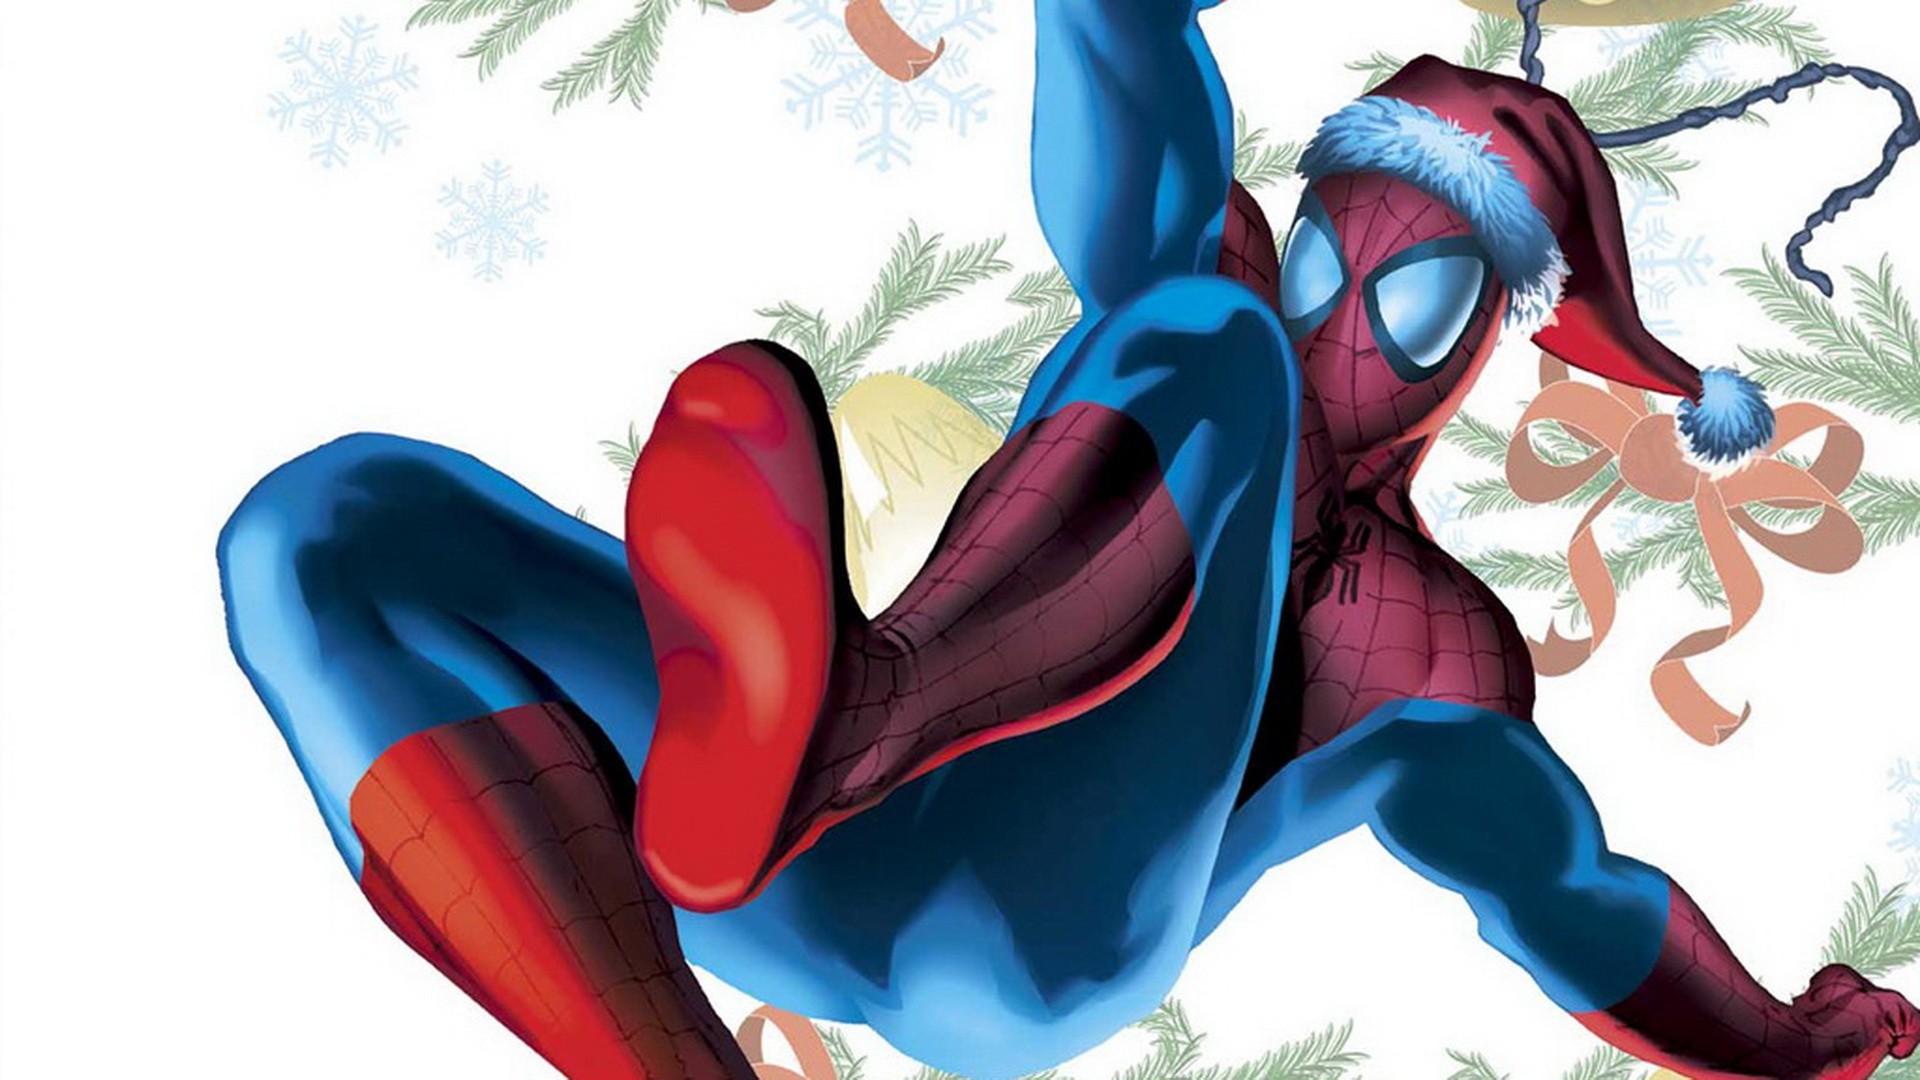 1920x1080 Merry Christmas from your friendly neighbor Spiderman